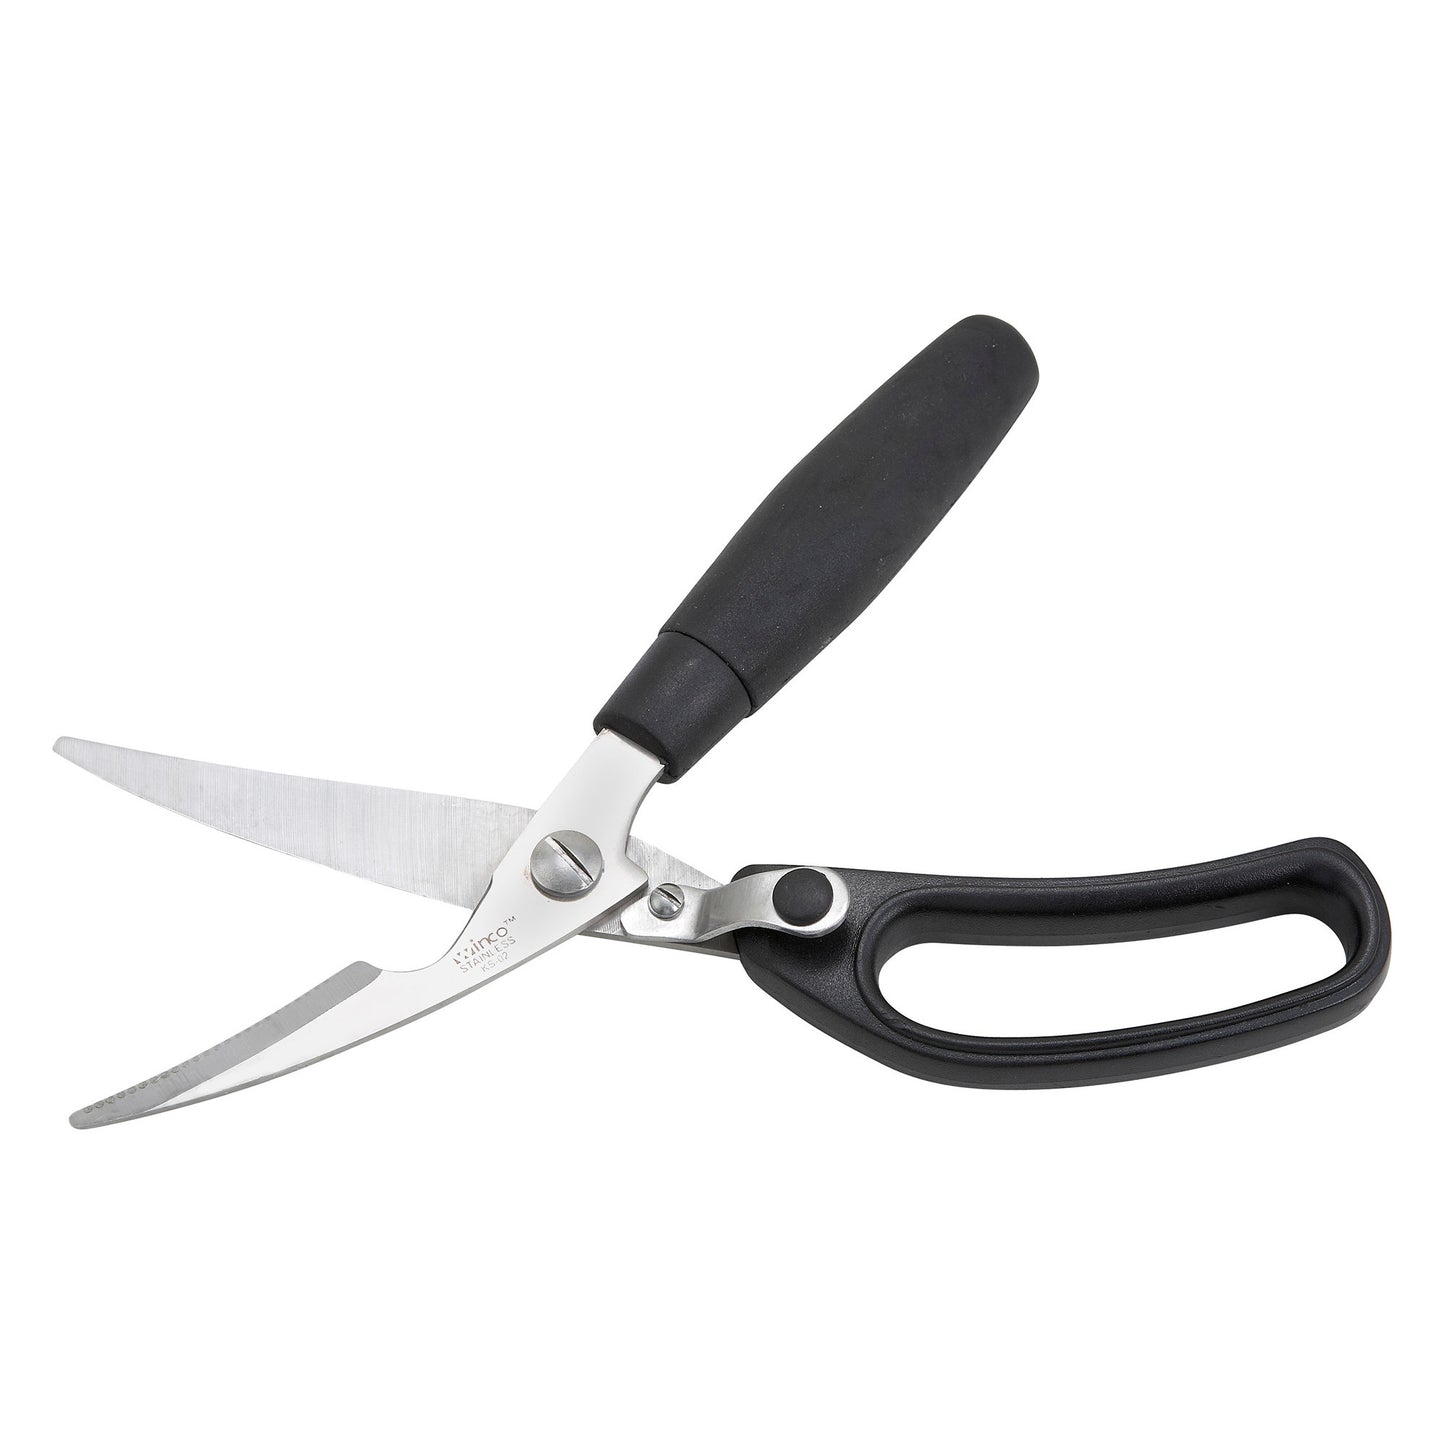 KS-02 - Poultry Shears, Soft Polypropylene Handle, Stainless Steel